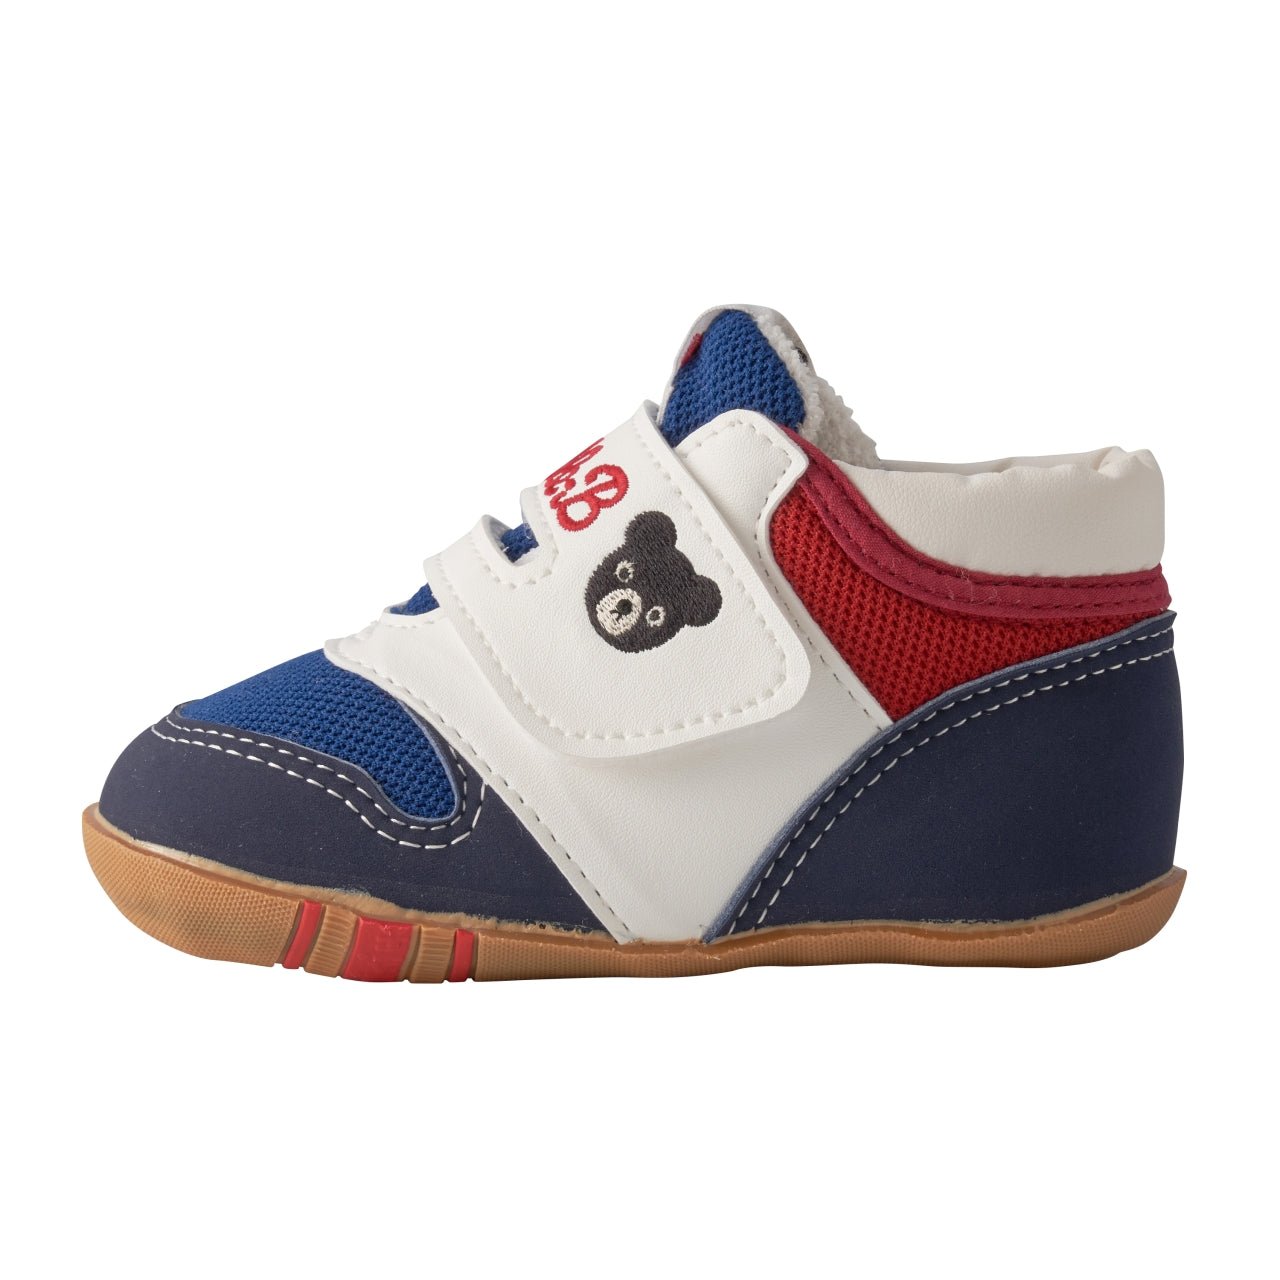 DOUBLE_B Sporty First Walker Shoes - 63-9304-384-03-11H